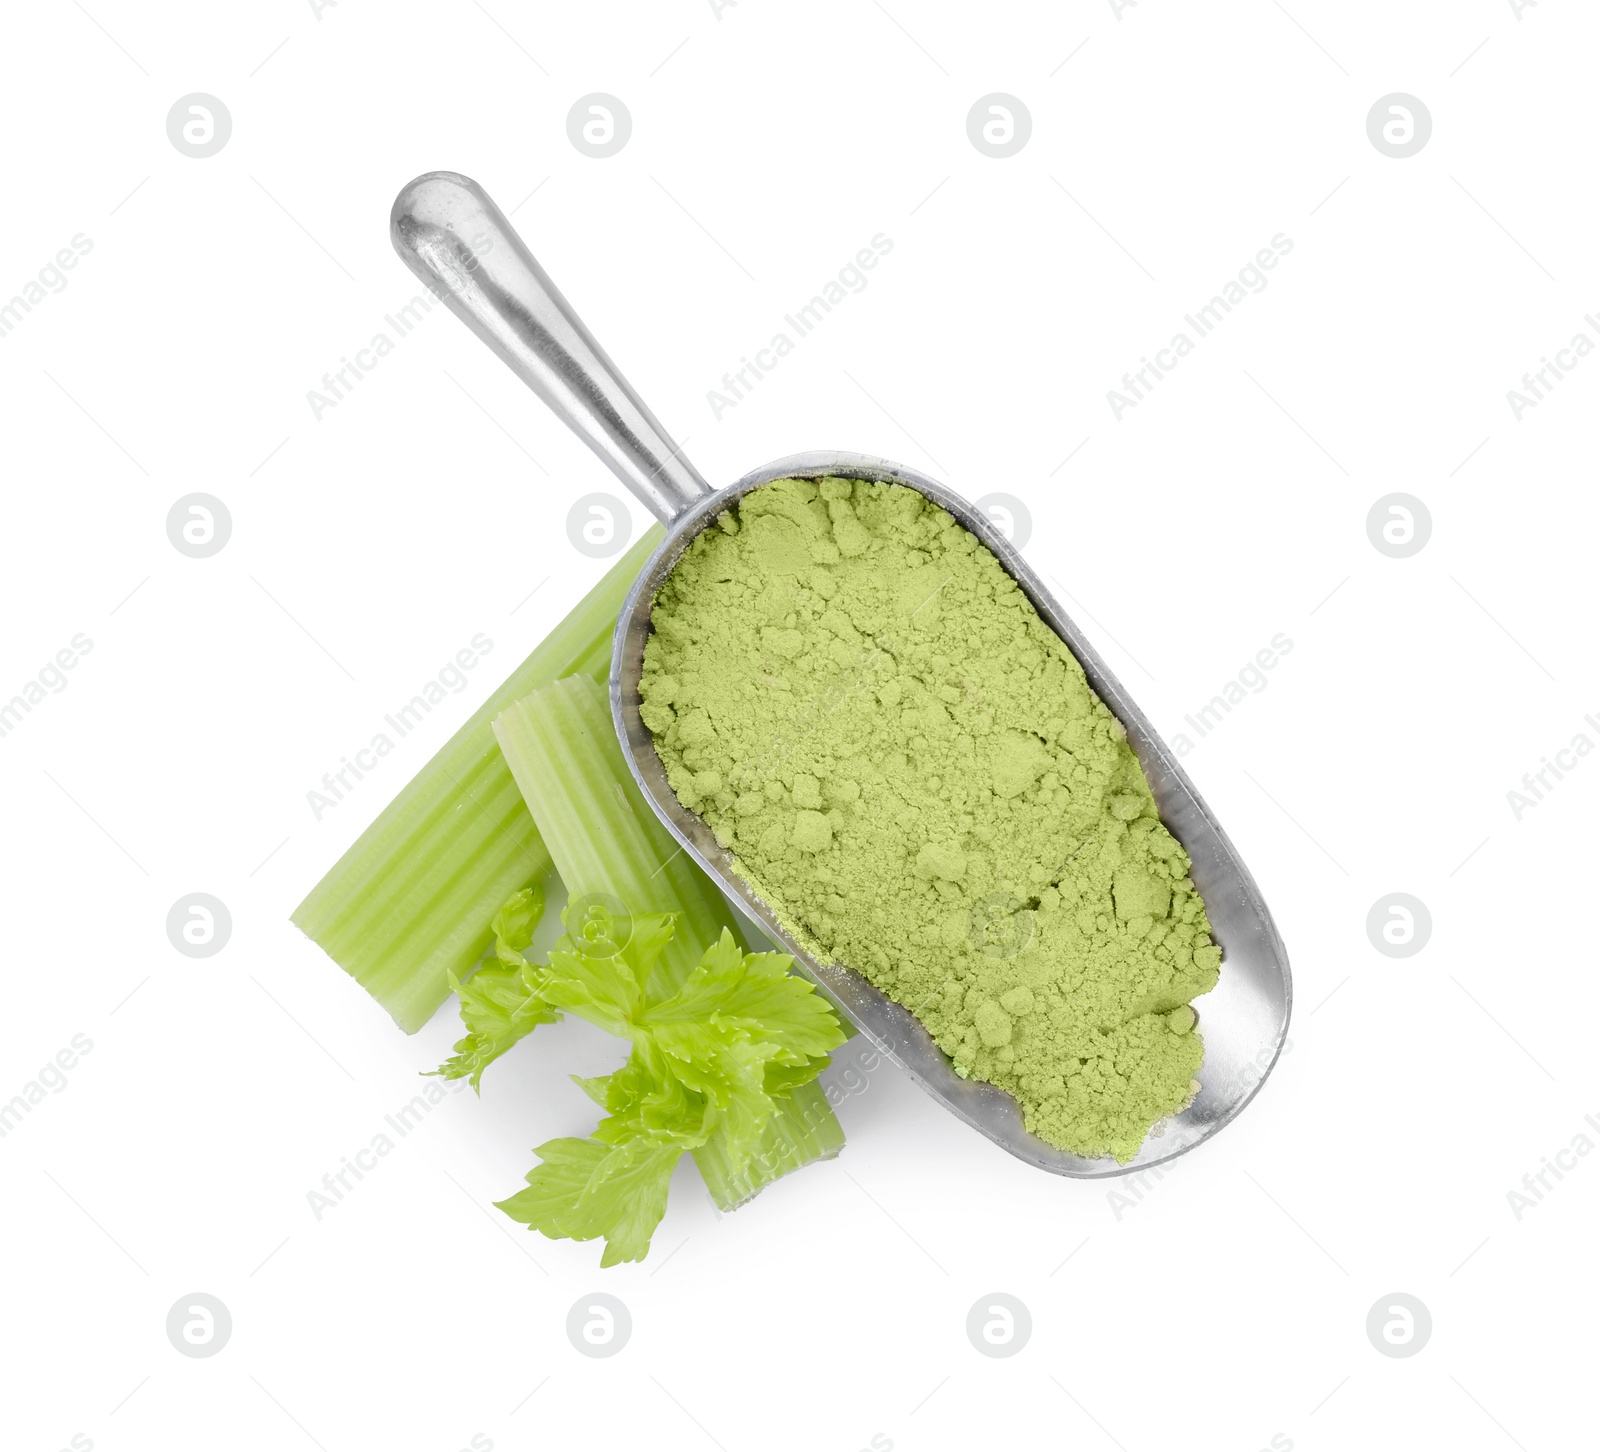 Photo of Scoop of celery powder and fresh cut stalk isolated on white, top view